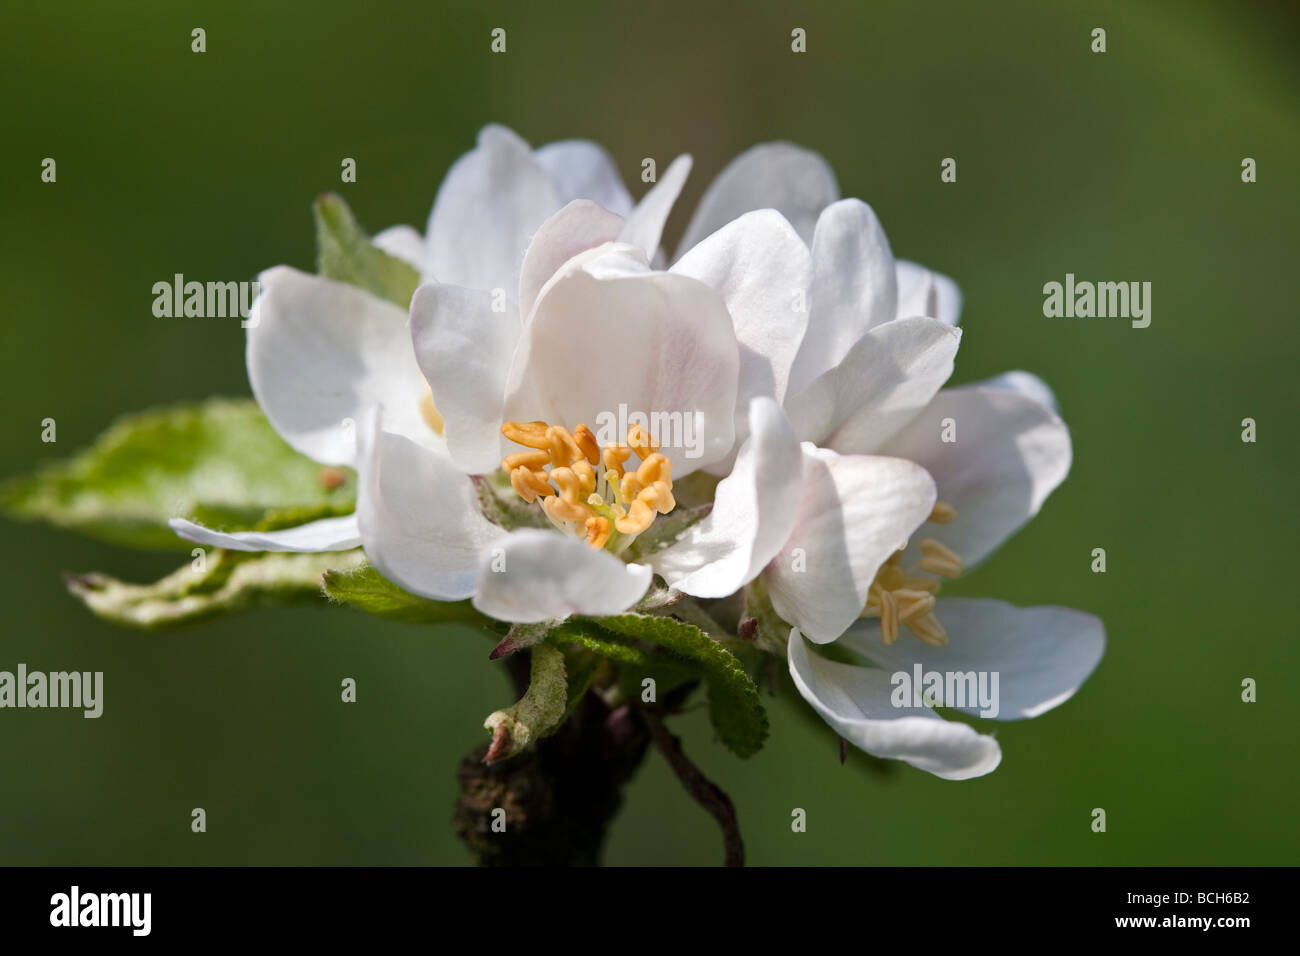 Malus - apple blossom, variety 'Discovery' Stock Photo